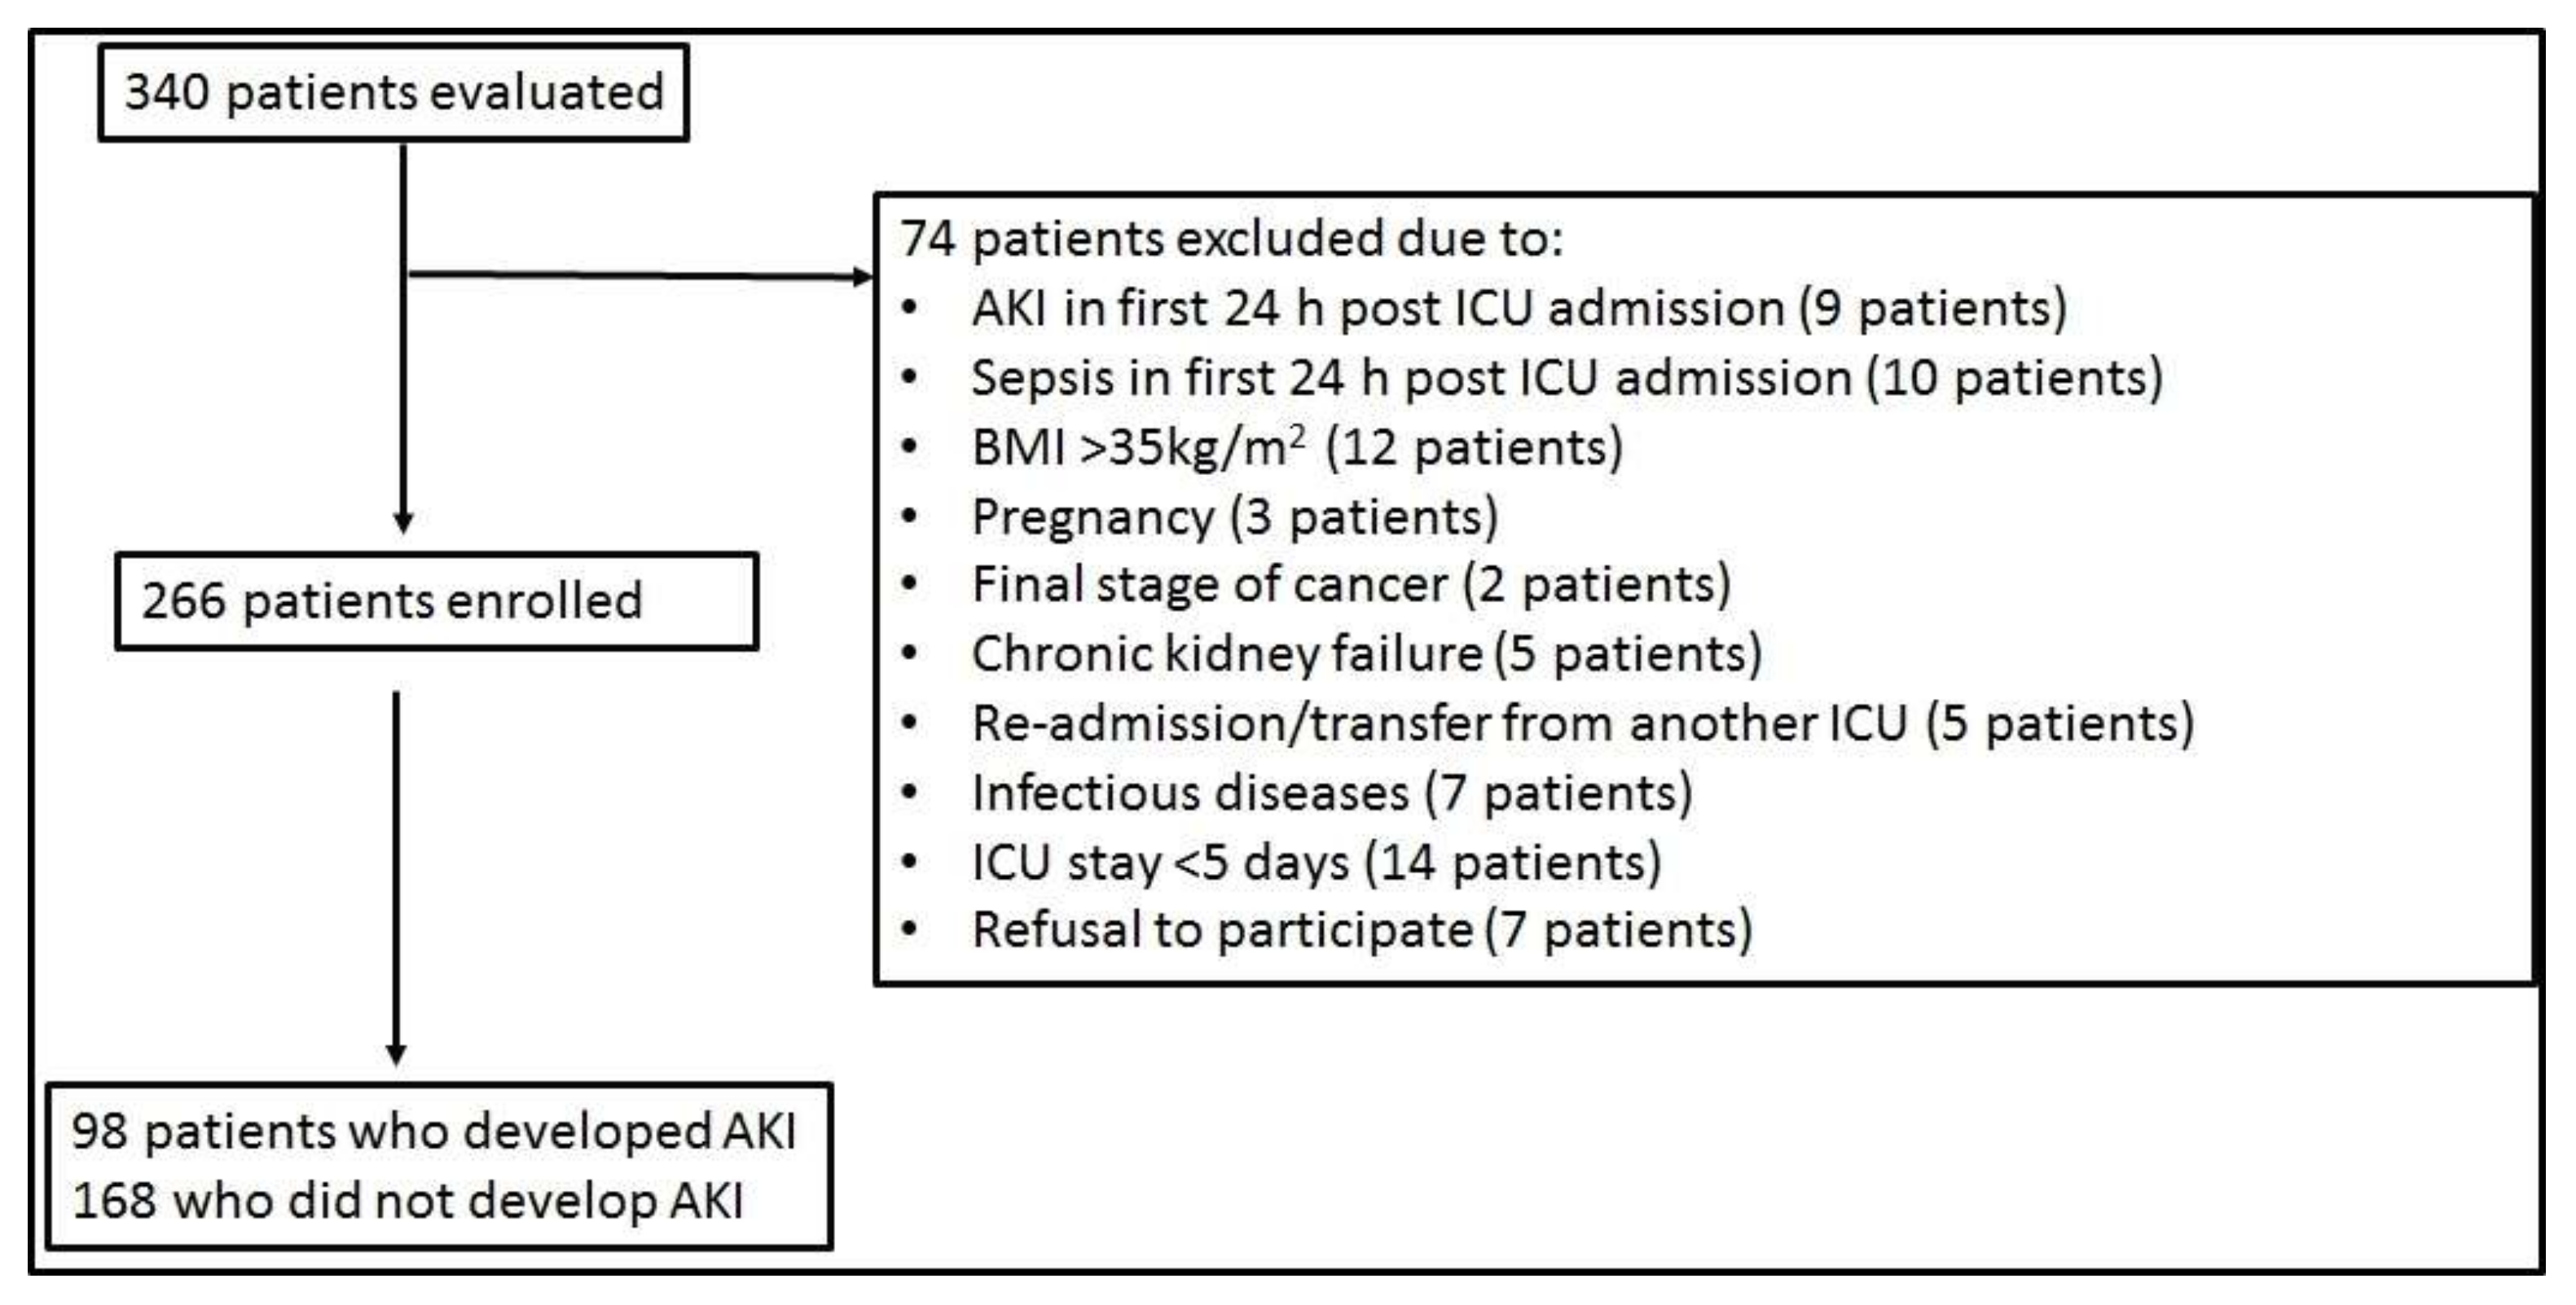 Product Recommendations  NGAL- Early Marker of Acute Kidney  Injury